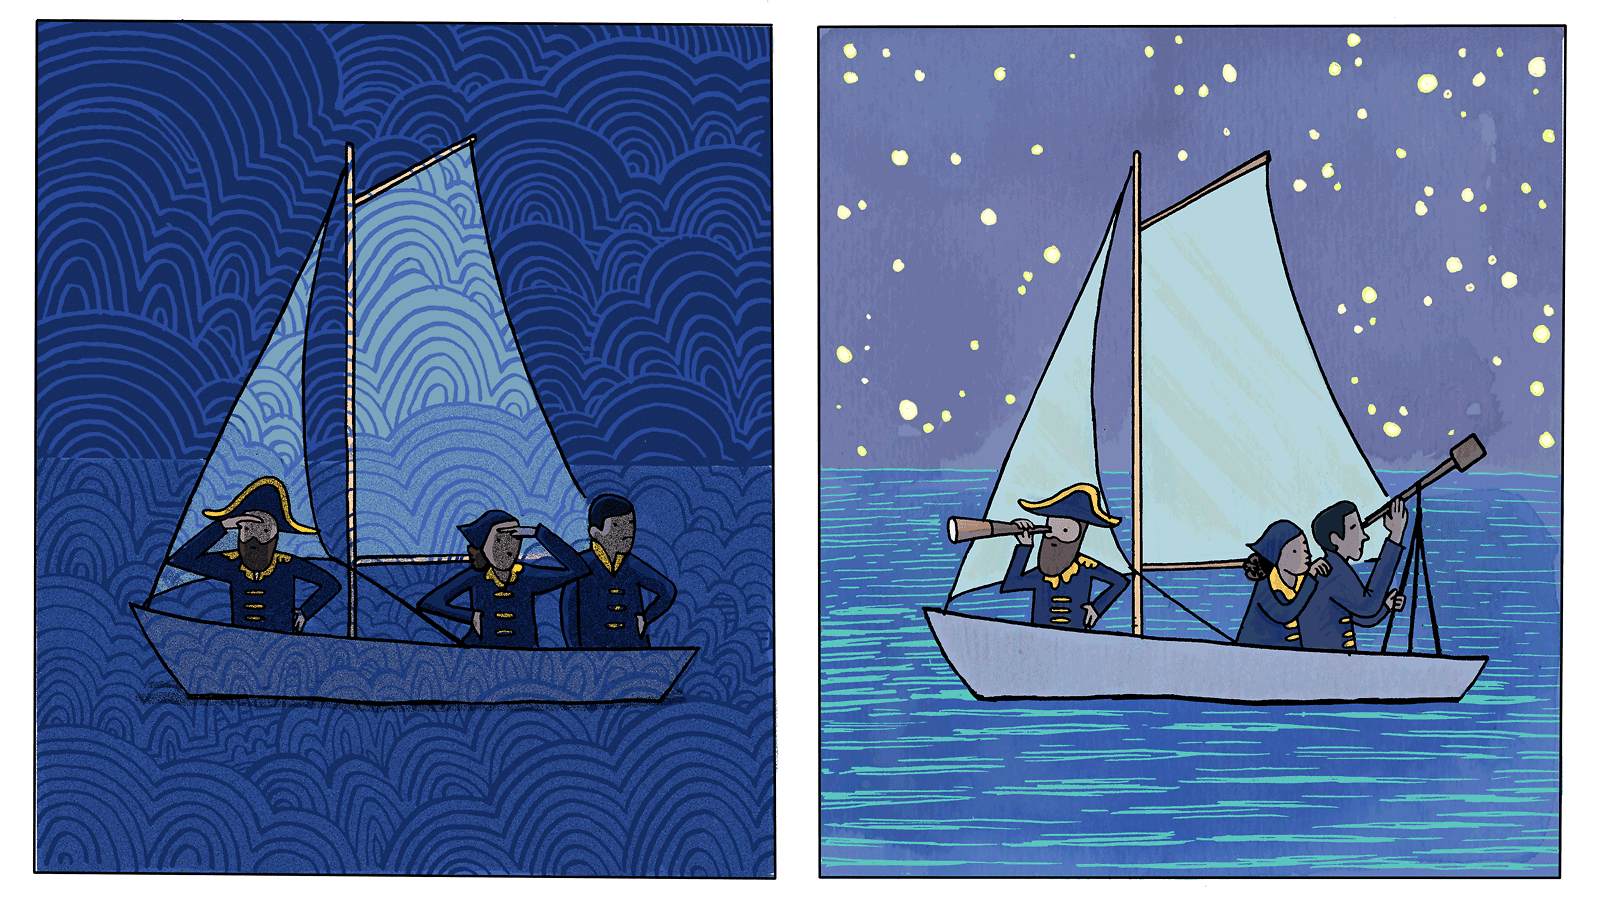 Illustration of left side: captain and crew on small boat in the ocean at night, daylight on right side